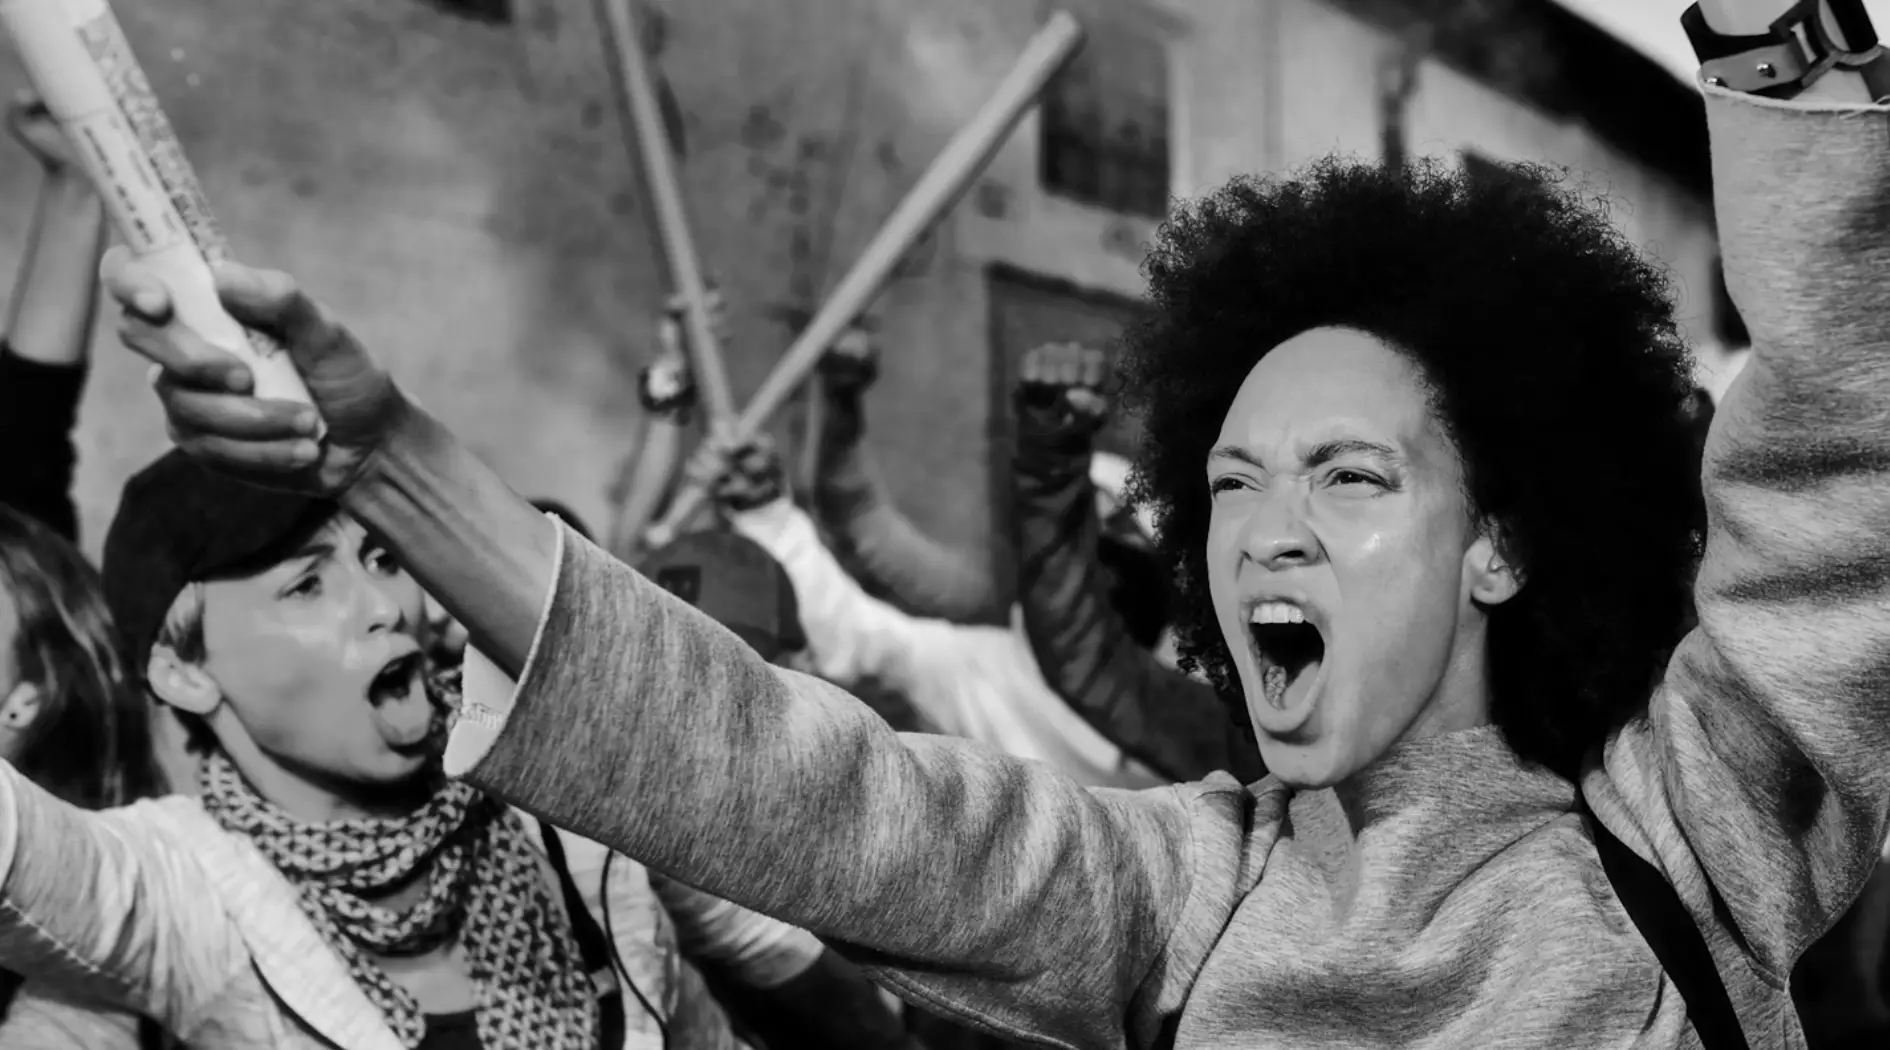 A black and white photo of a woman shouting in a crowd, capturing a moment emblematic of Press Freedom Defense Fund's mission.